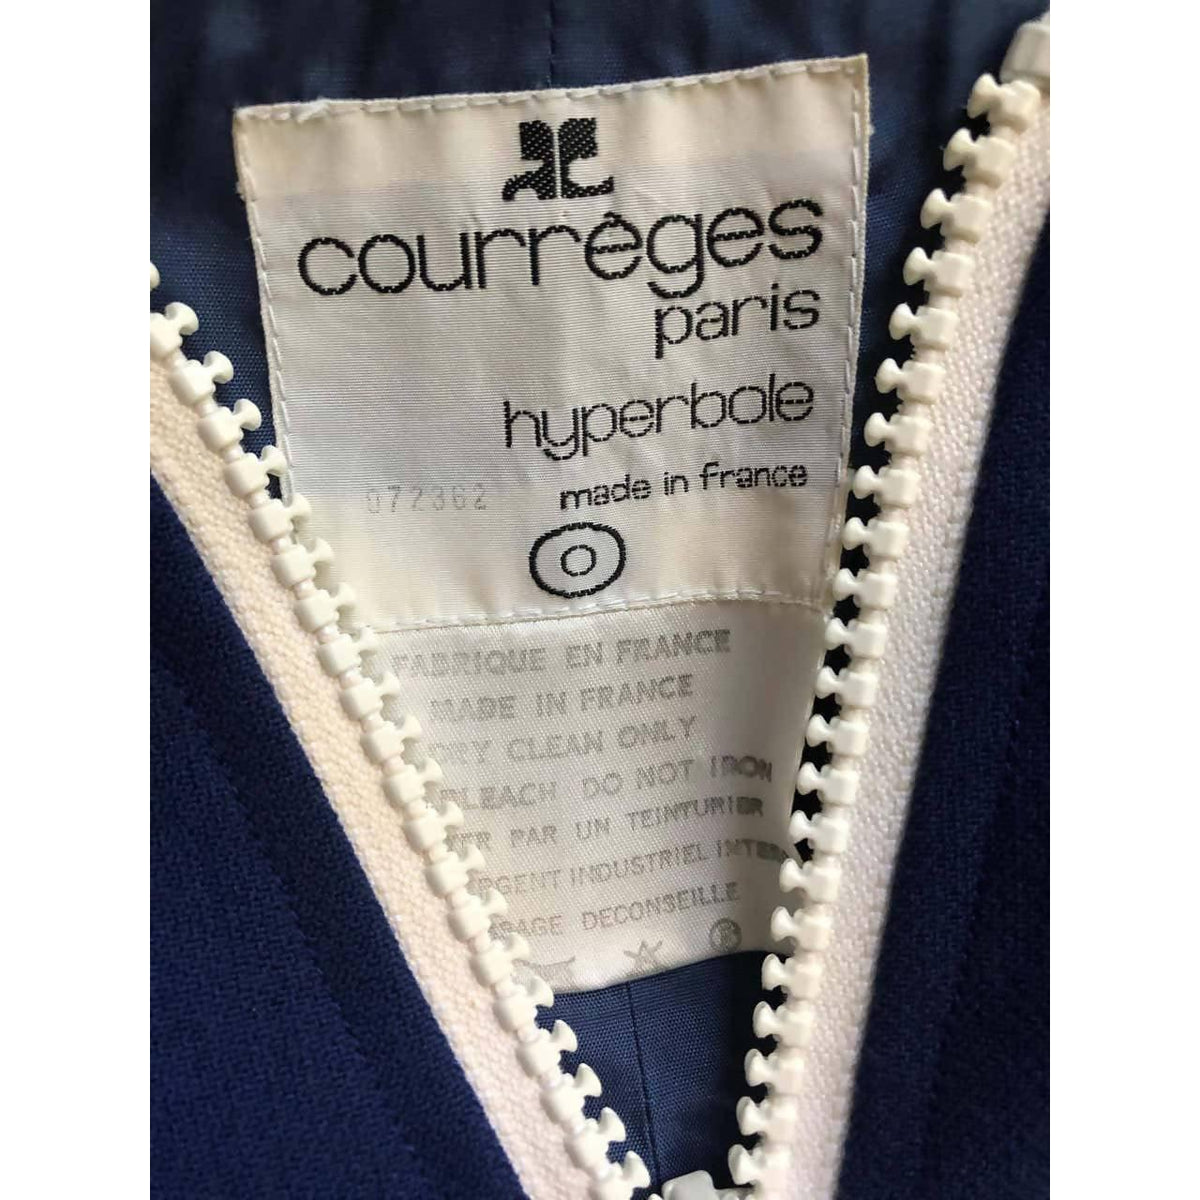 Pre-Owned COURREGES Navy Blue Sleeveless Space Age Dress with White Details | Size S - theREMODA